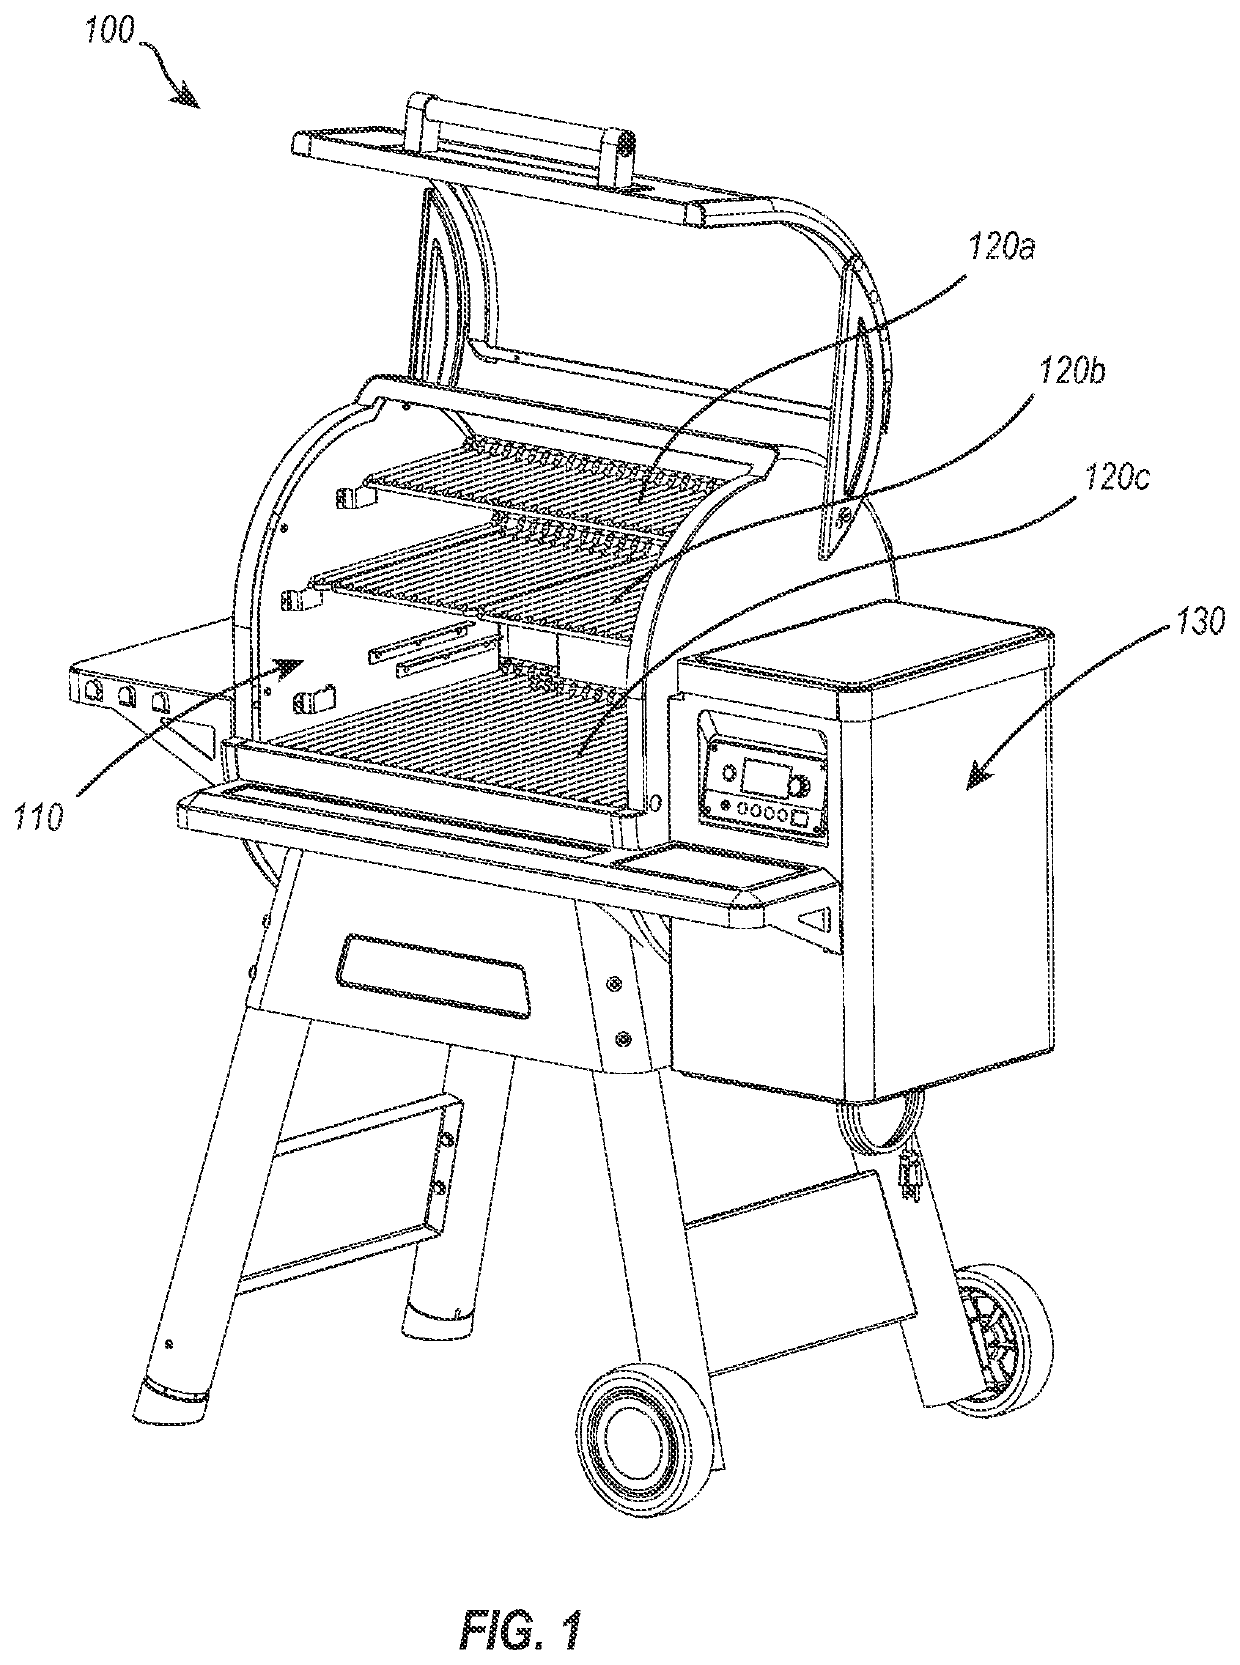 Self-cleaning grill